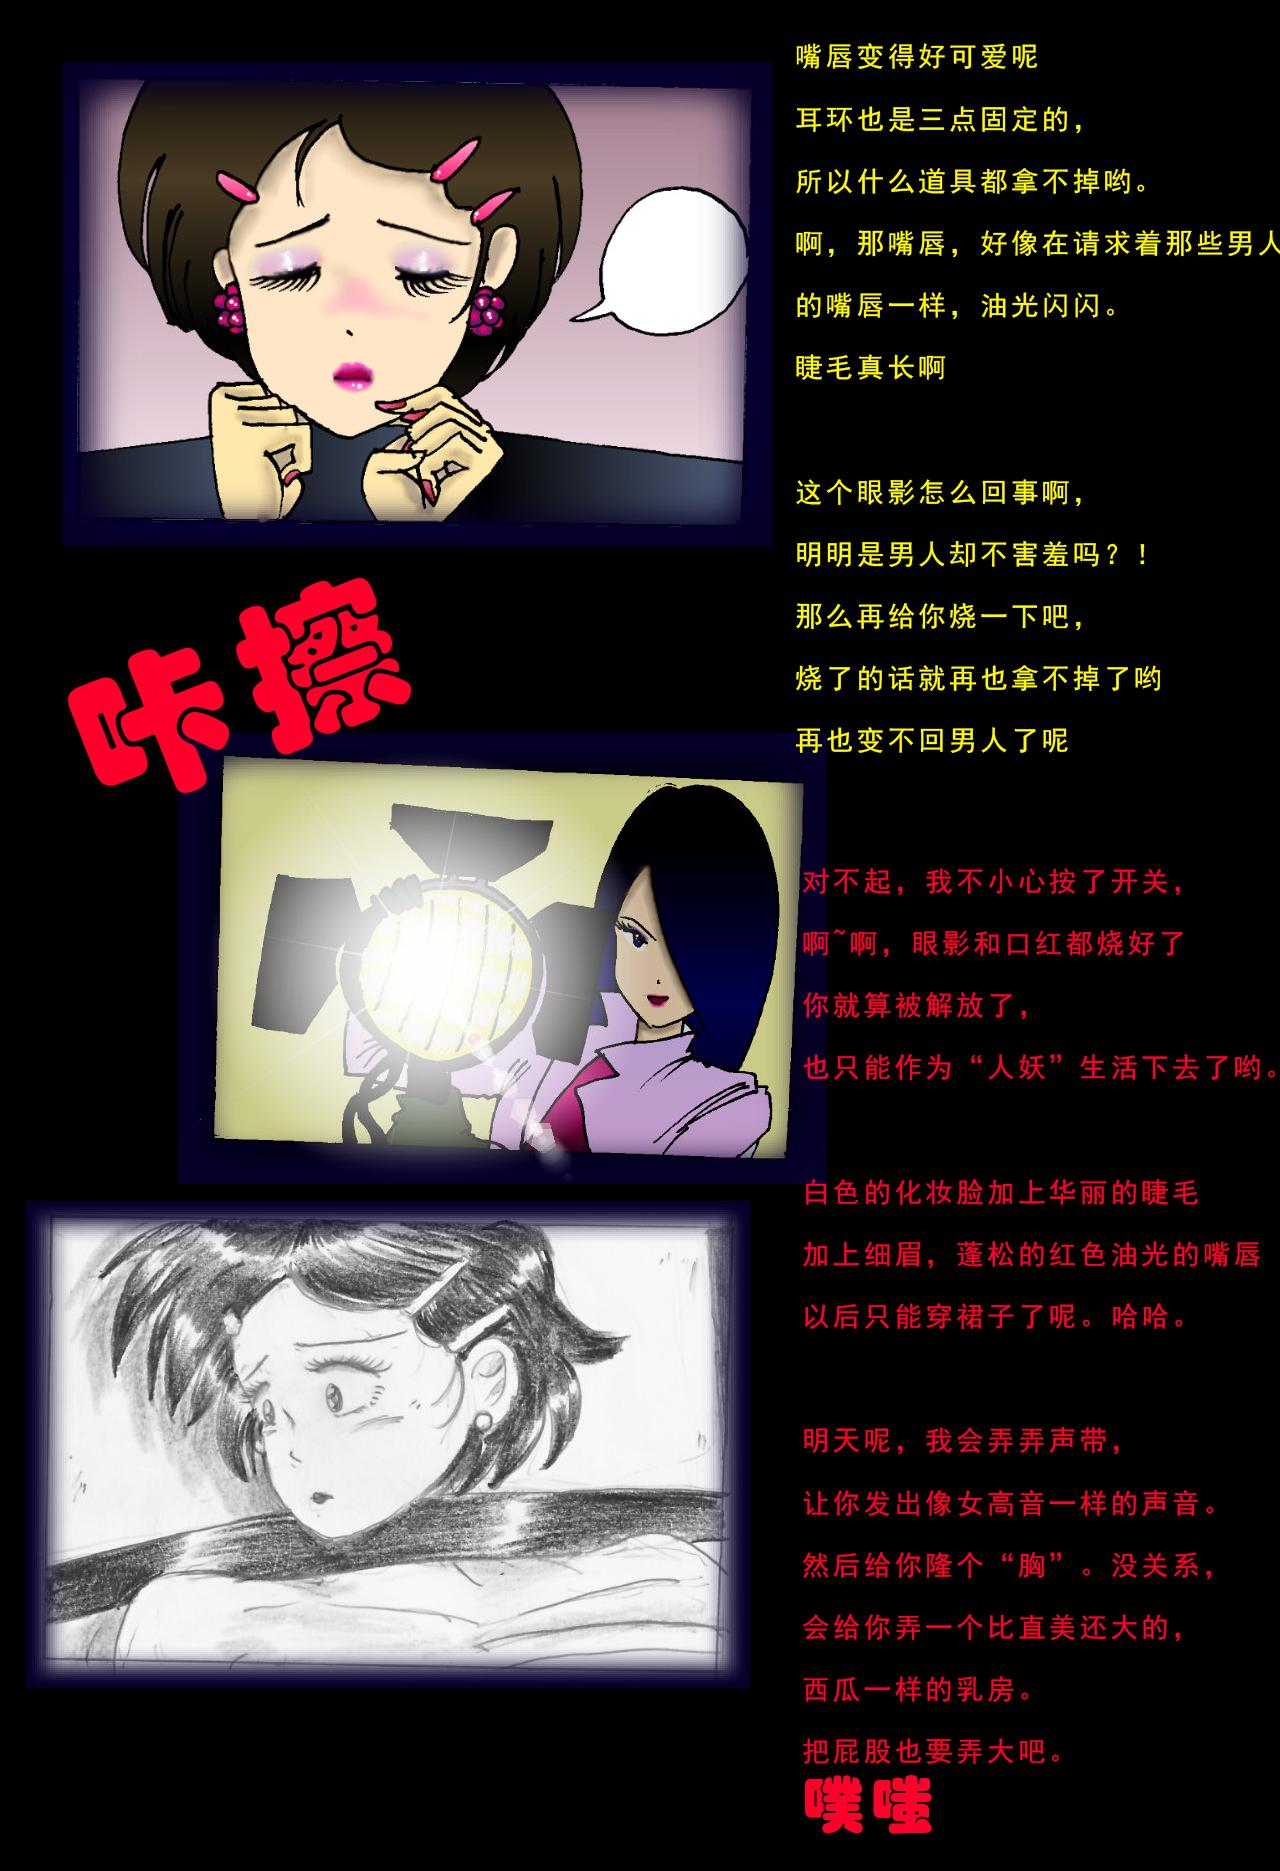 Perfect Tits Special Police Third Platoon Captain Abduction Restraint Edition【chinese】 Messy - Page 8